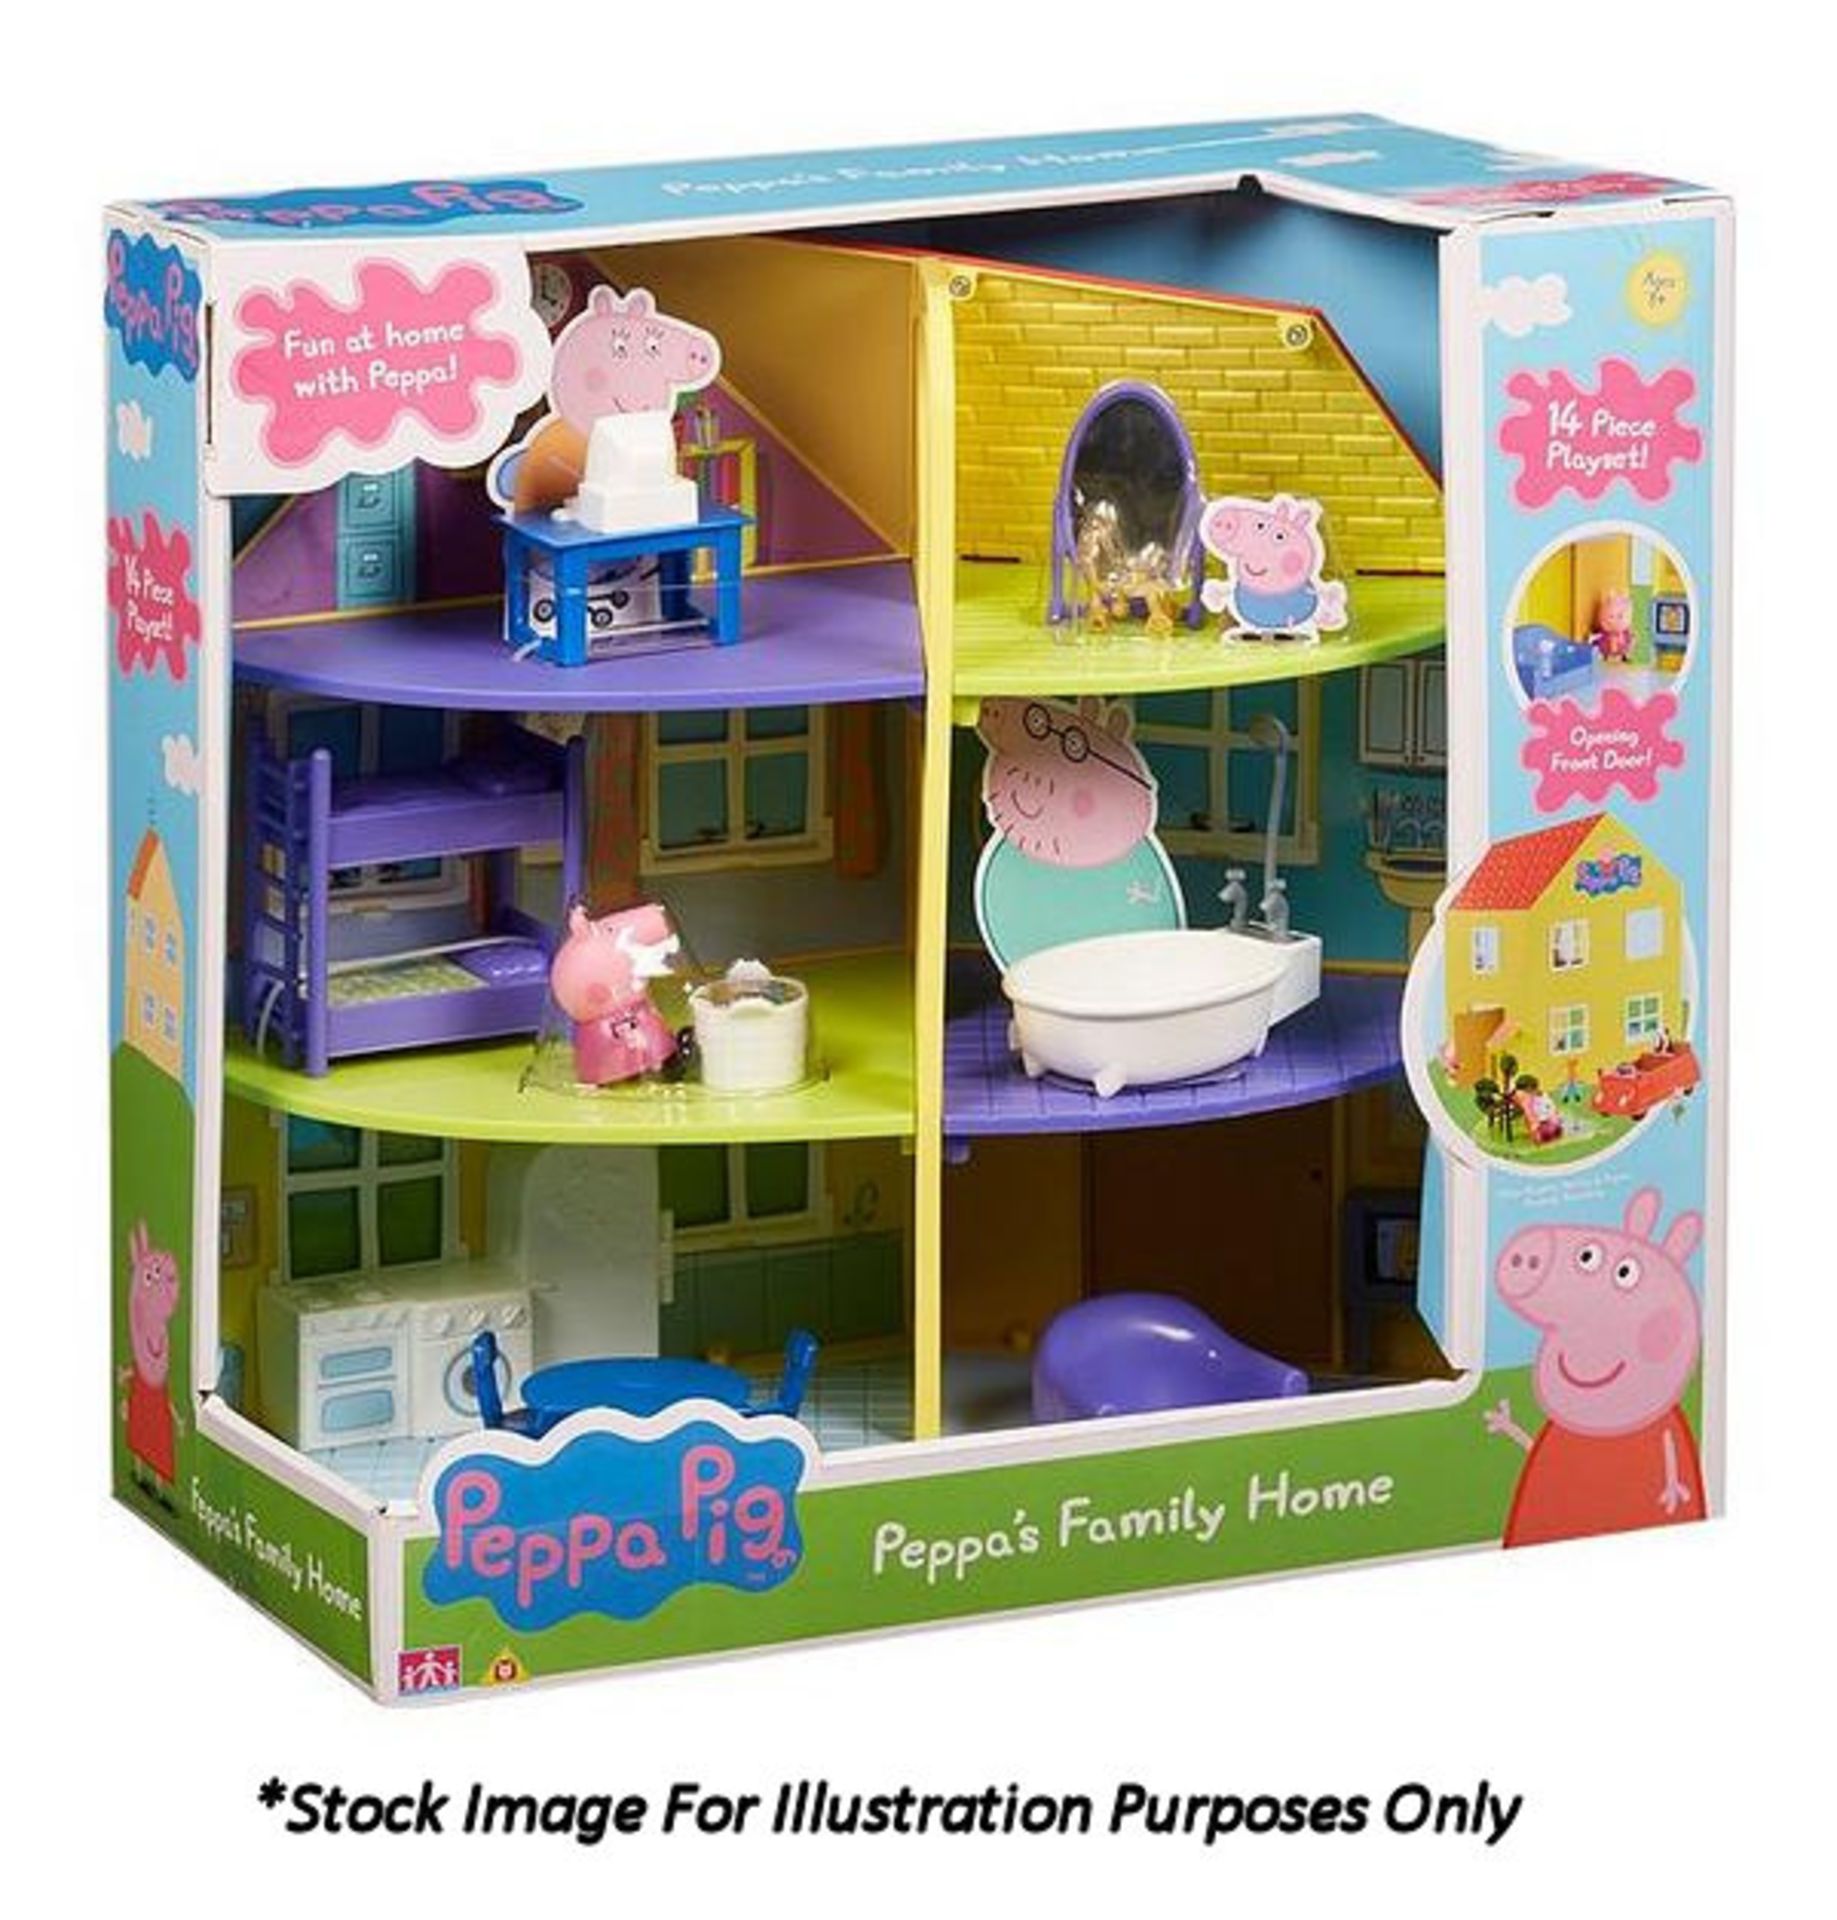 1 x Peppa Pig Peppa's Family Home Play Set - New/Boxed